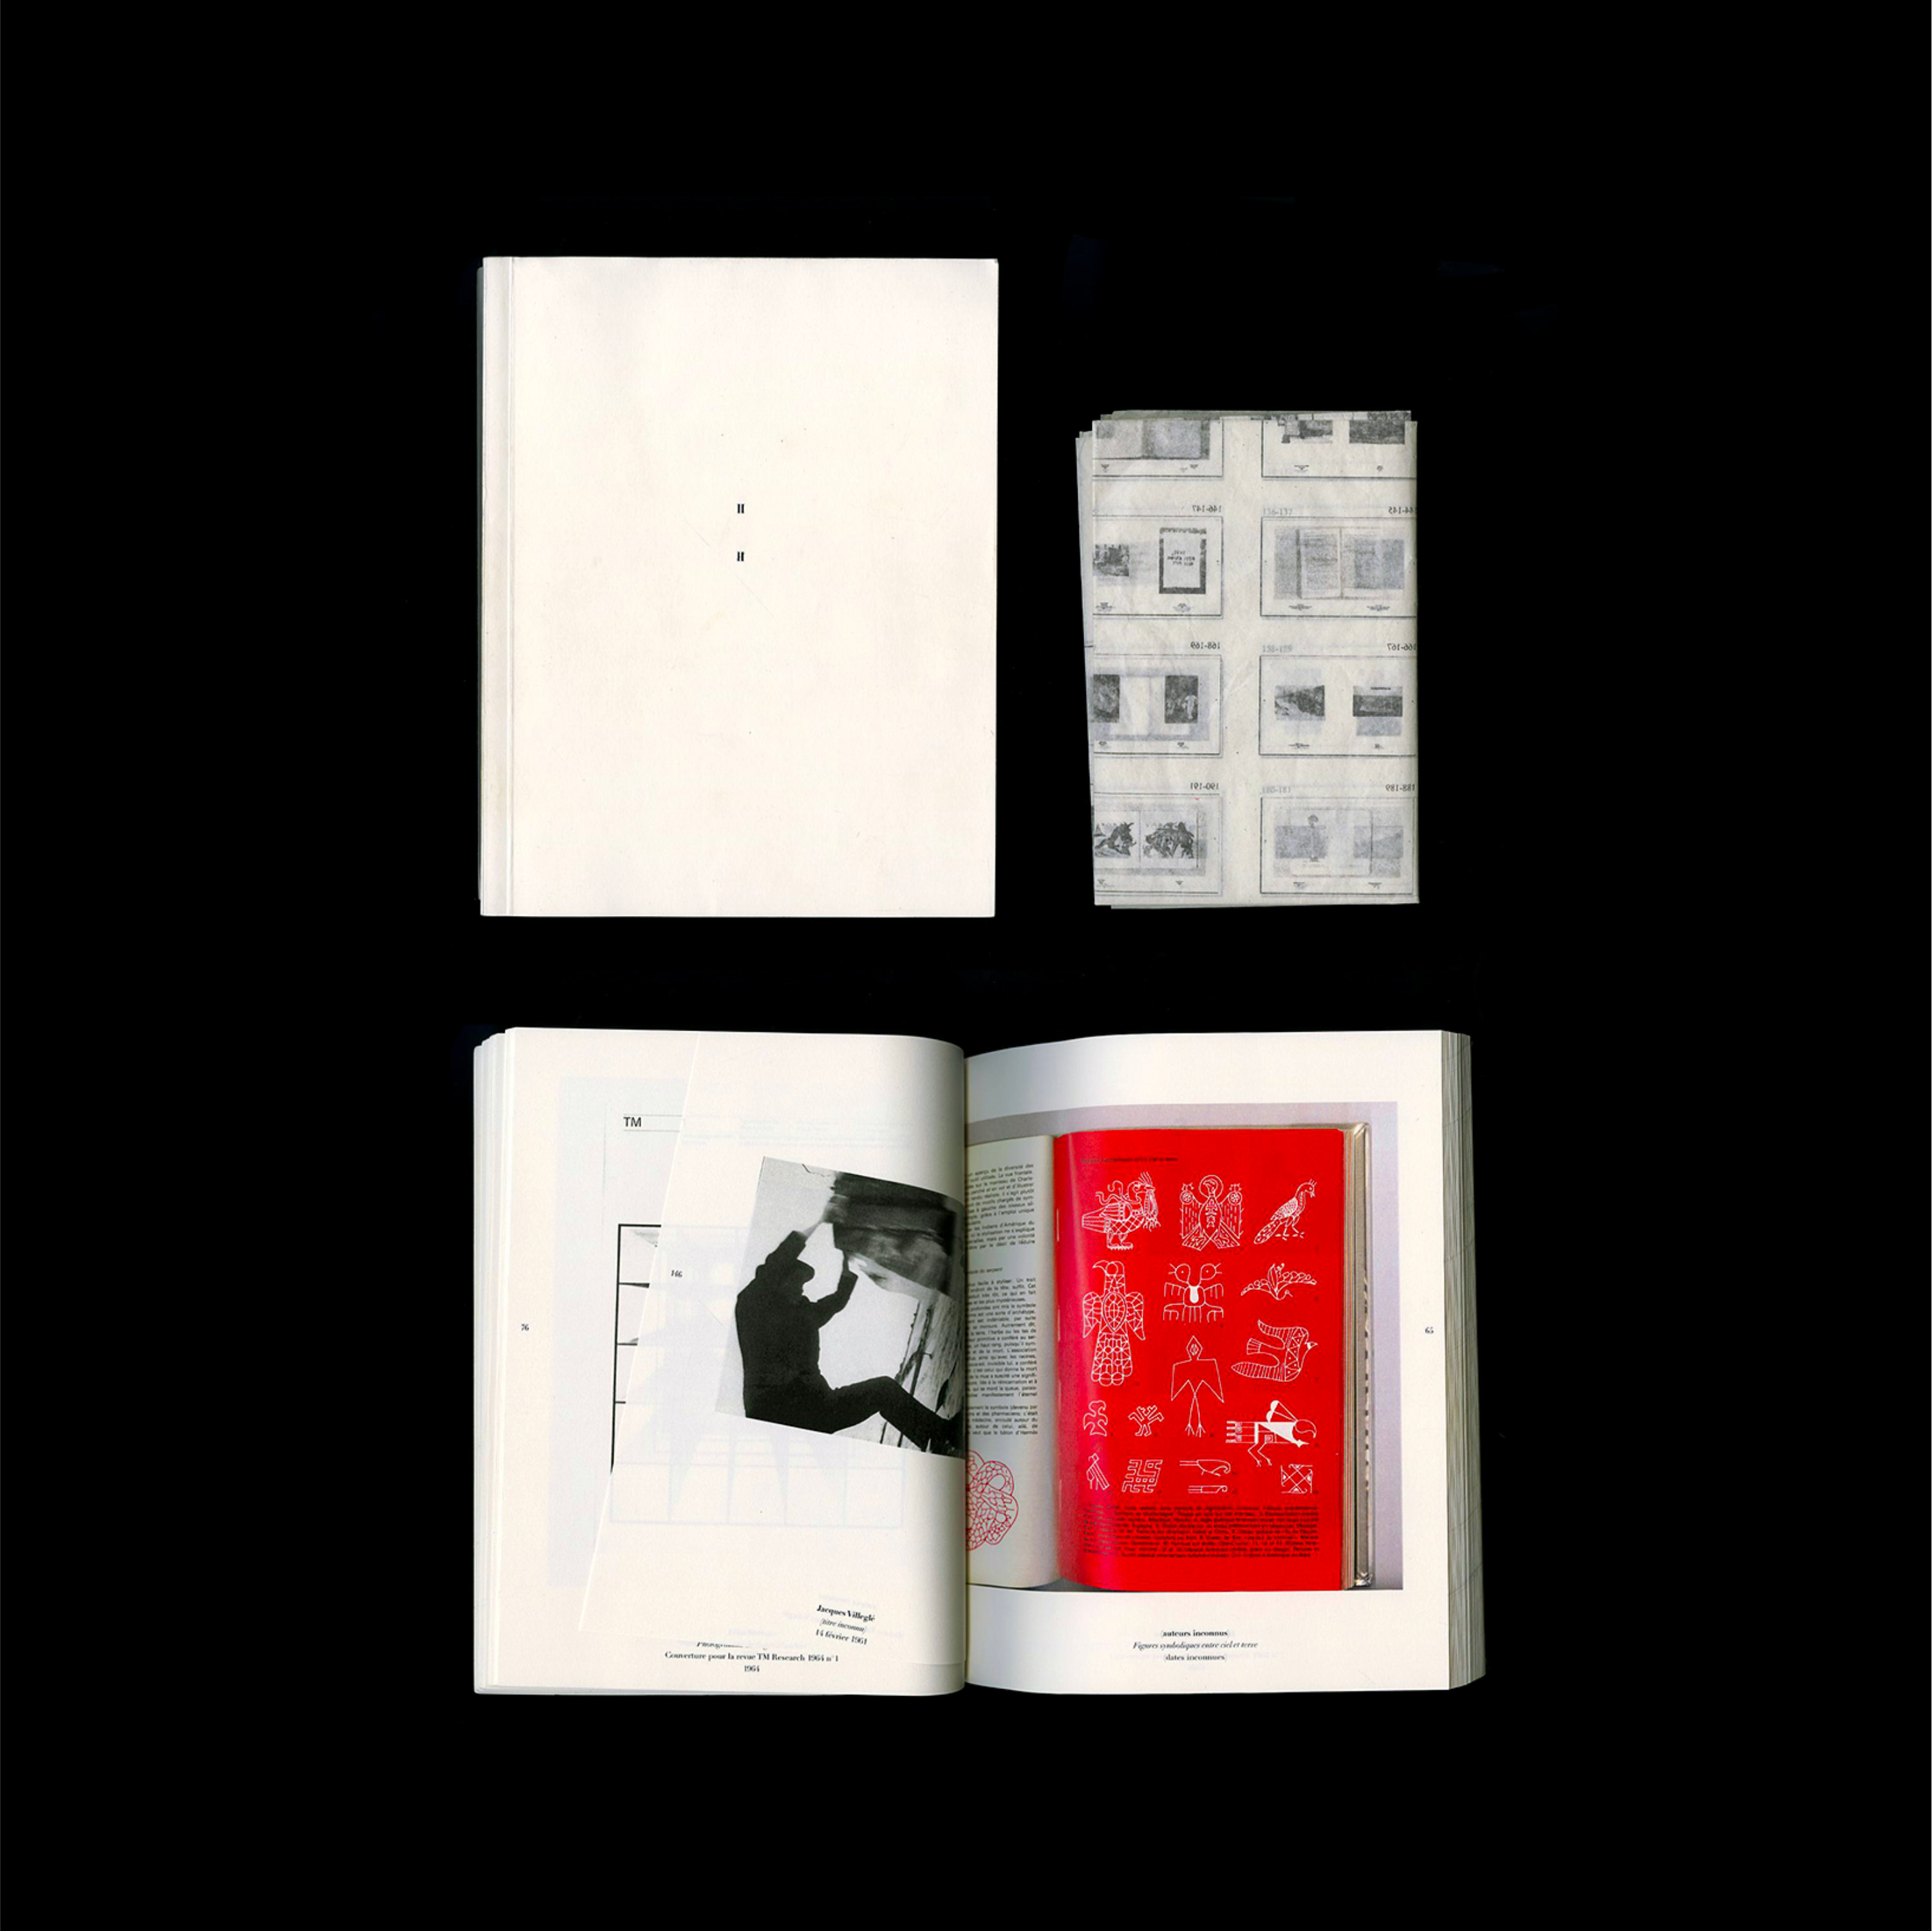 View of Musee Imaginaire, book design by Lena Robin